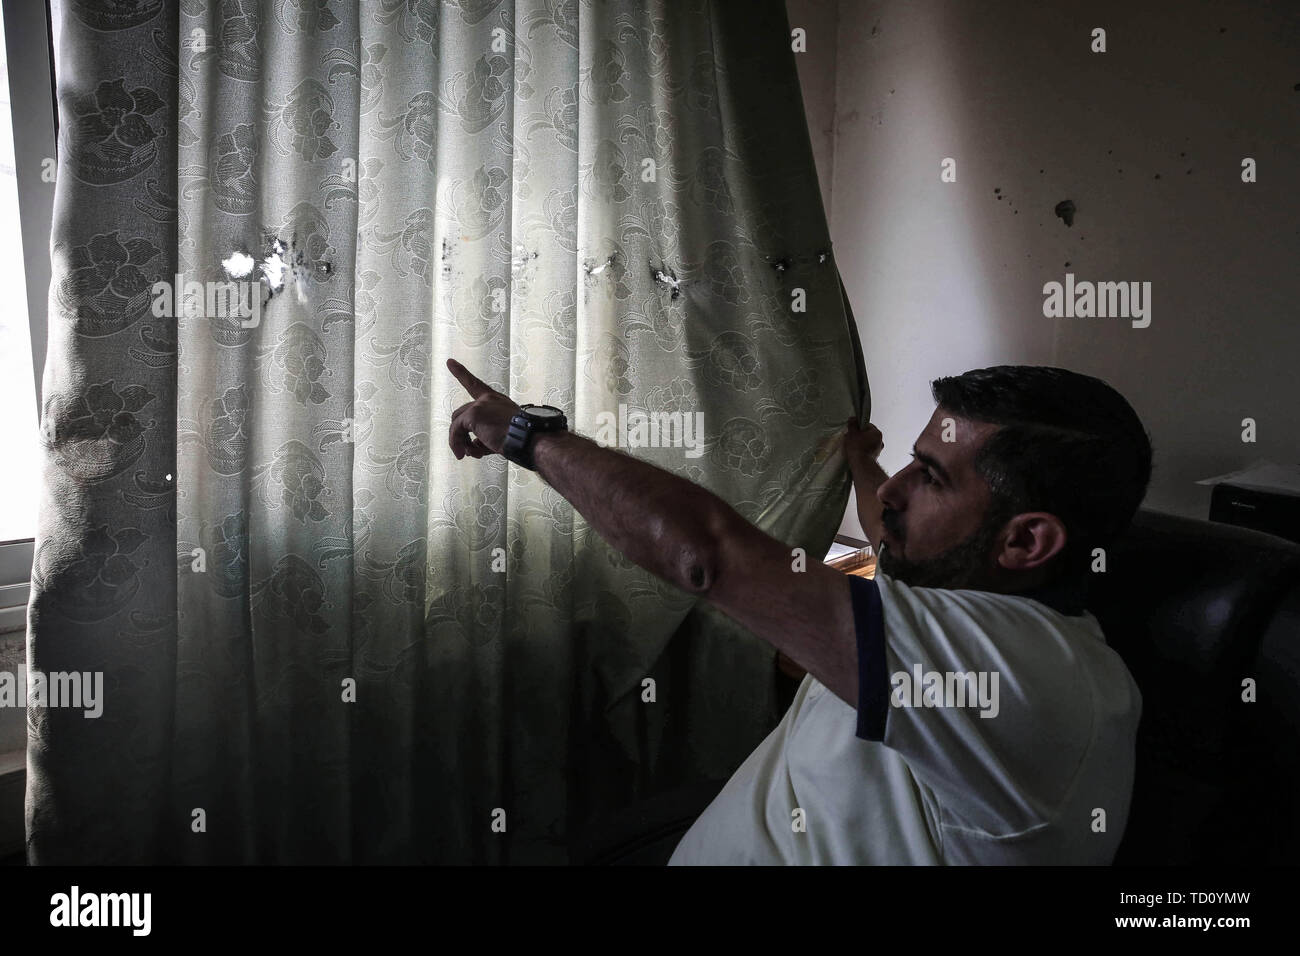 Nablus, Palestinian Territories. 11th June, 2019. A Palestinian security officer points at bullet holes inside the headquarters of the Palestinian Preventive Security (PPS), one of the security apparatus of the Palestinian Authority. In a rare incident Israeli soldiers had a shootout with Palestinian security forces over a case of mistaken identity. Reportedly only two Palestinians were injured. Credit: Ayman Nobani/dpa/Alamy Live News Stock Photo